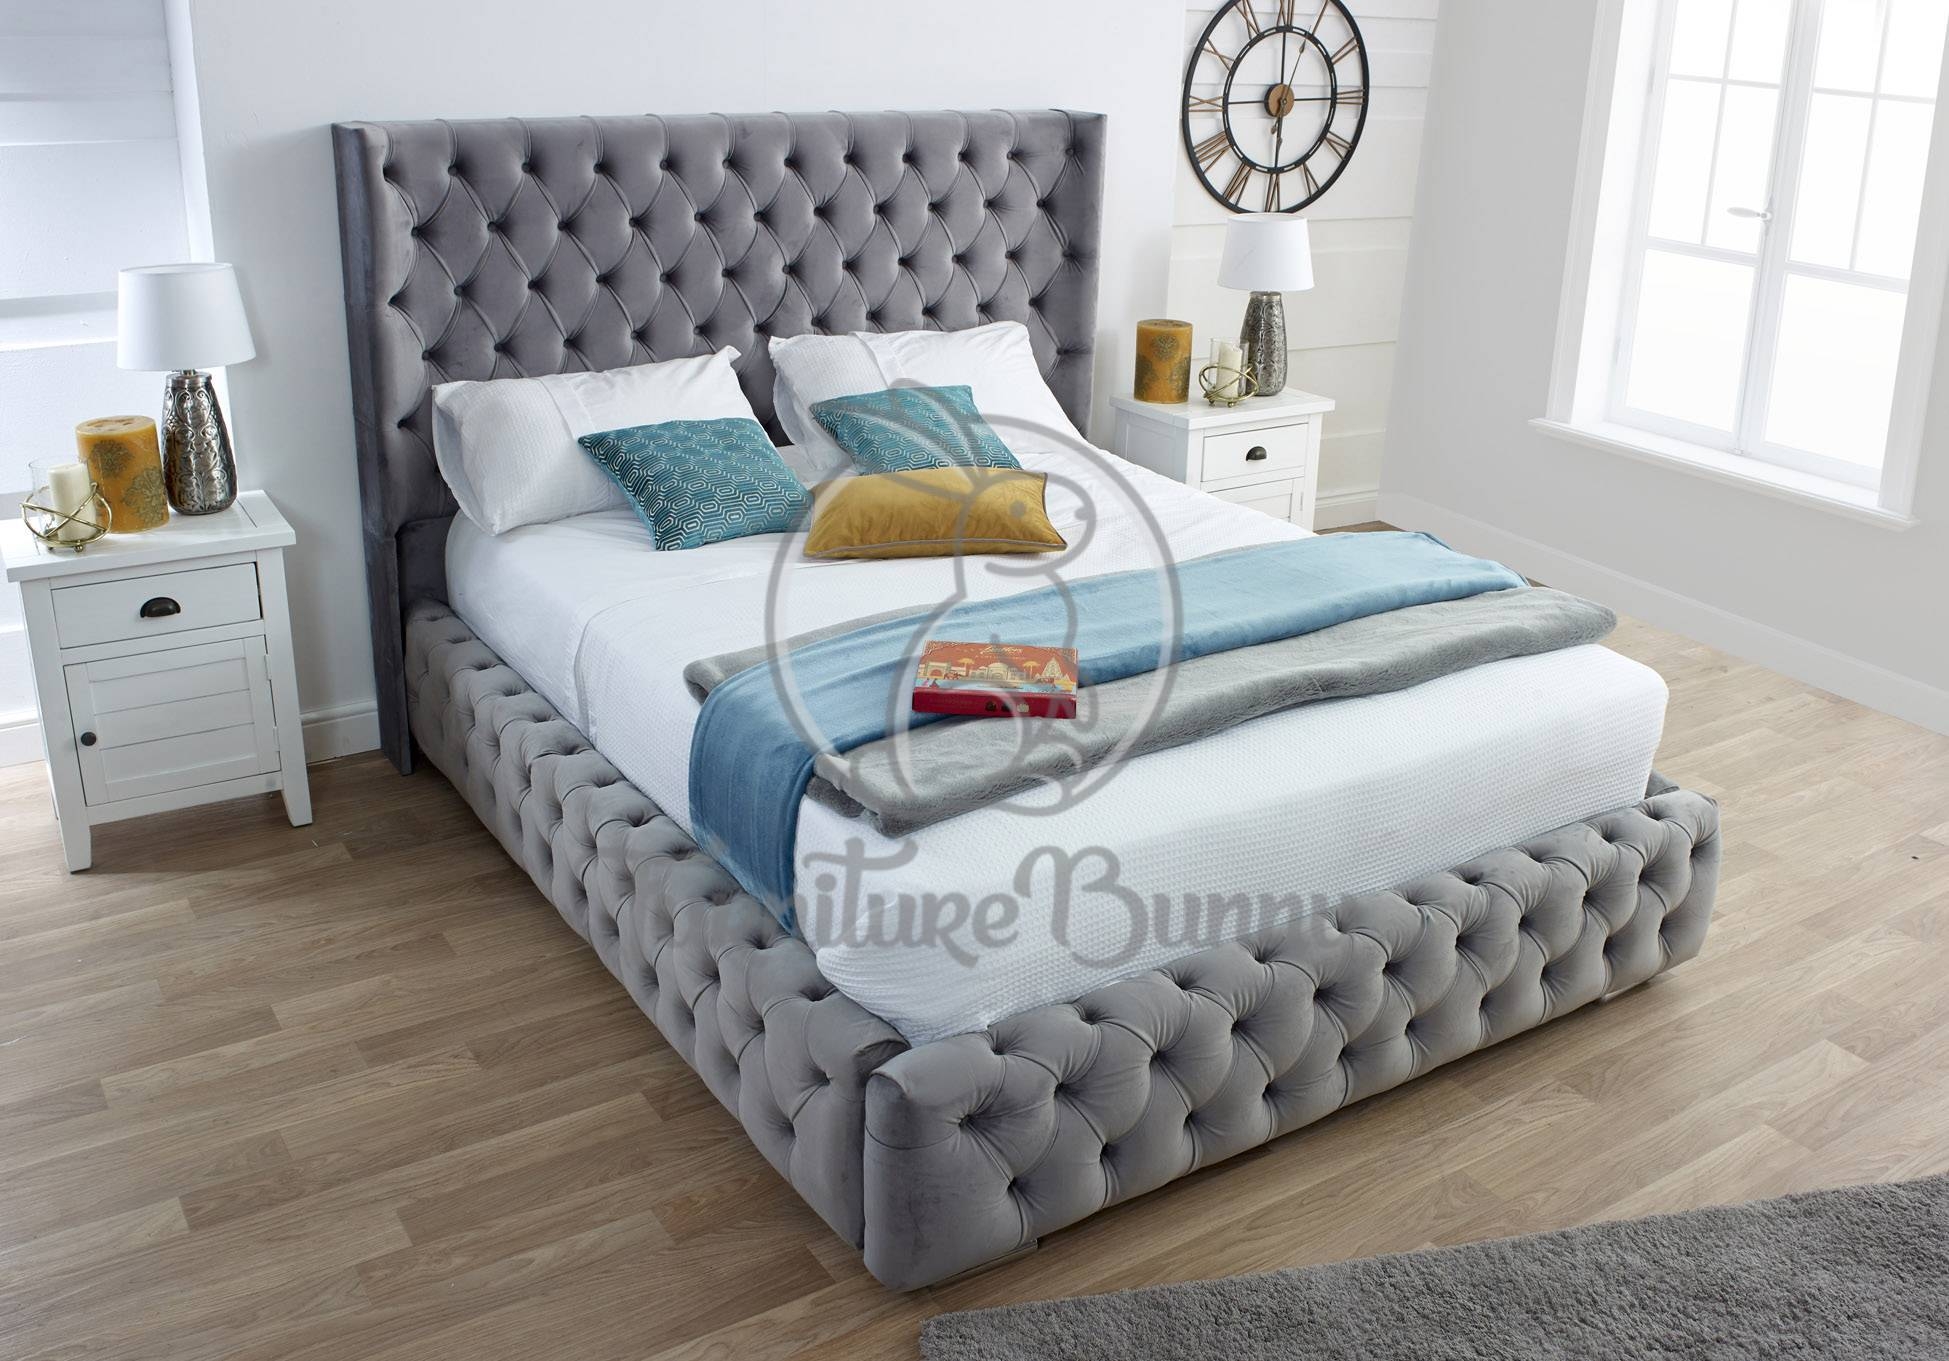 The Sultan Bed – Furniture Bunny